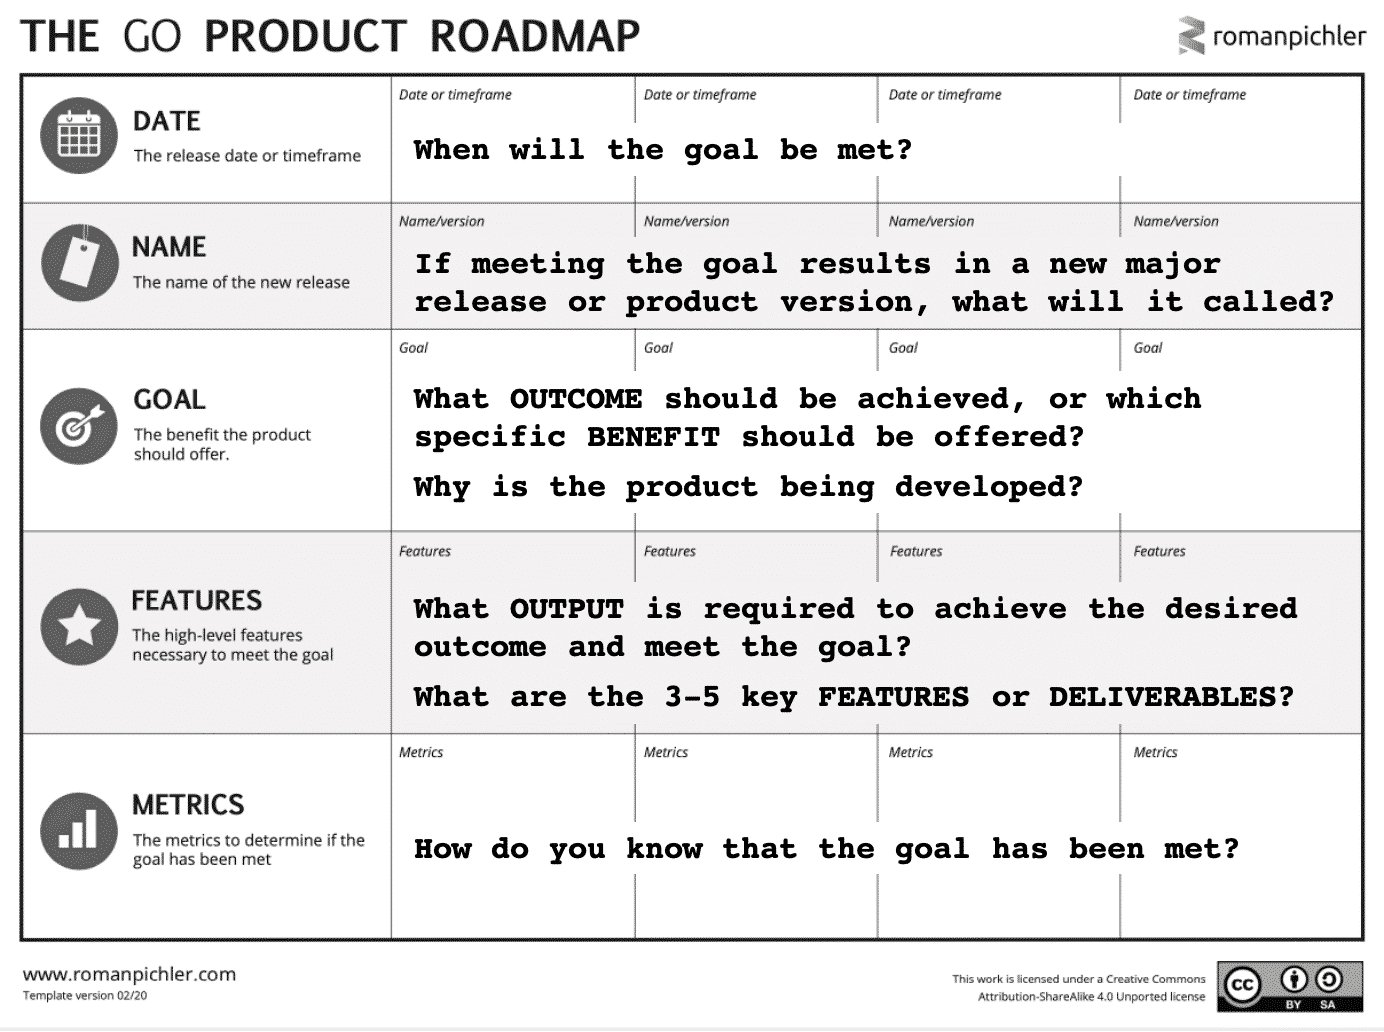 The GO Product Roadmap Explained